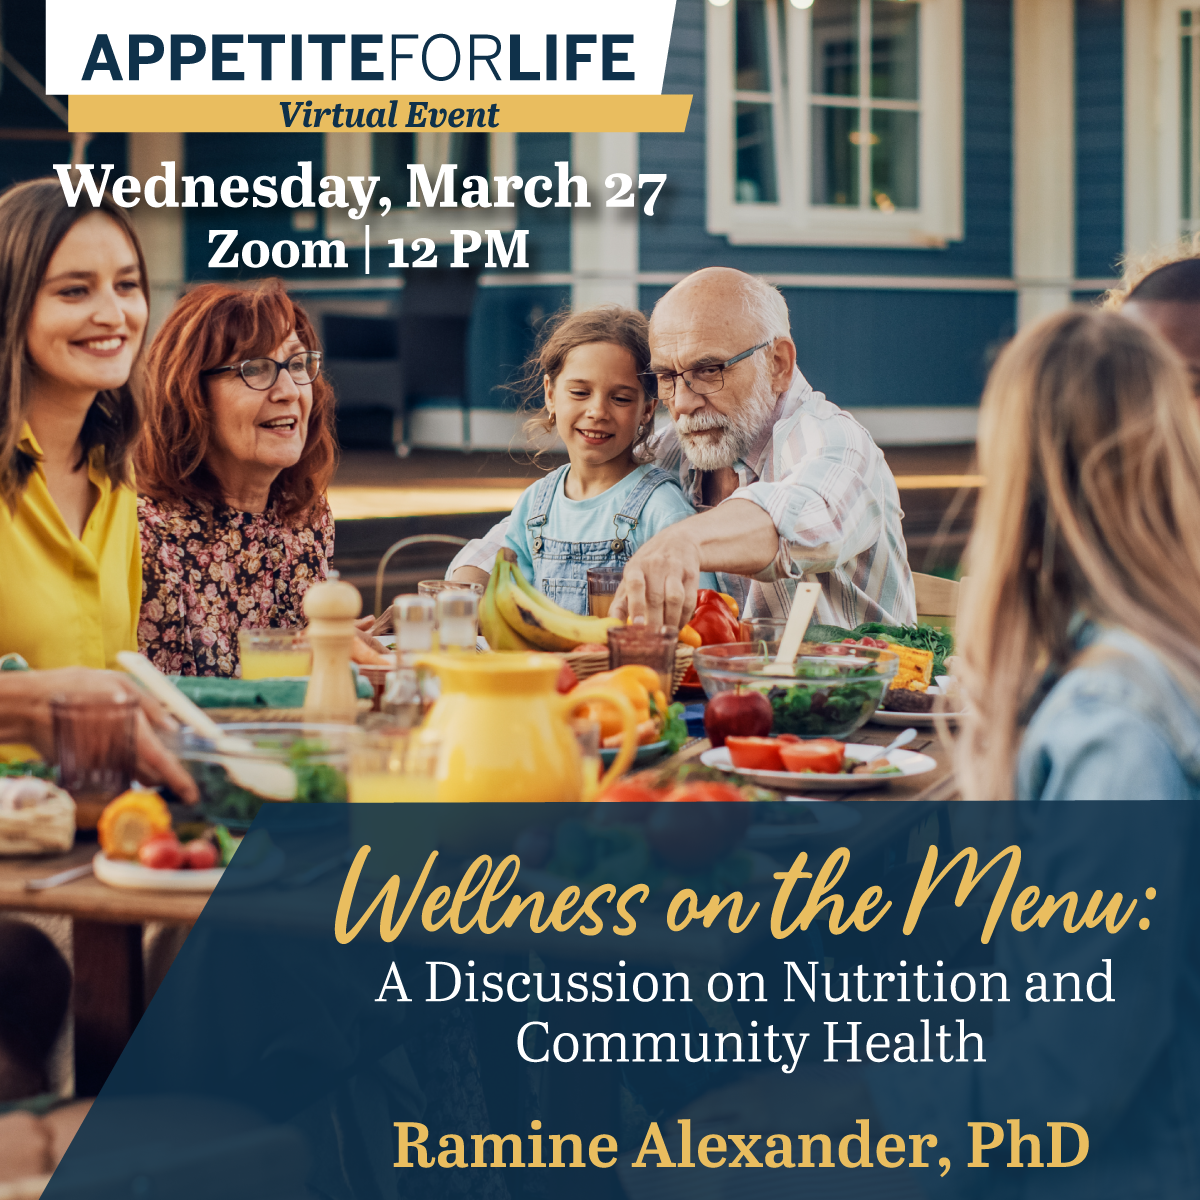 Wellness on the Menu: A Discussion on Nutrition and Community Health